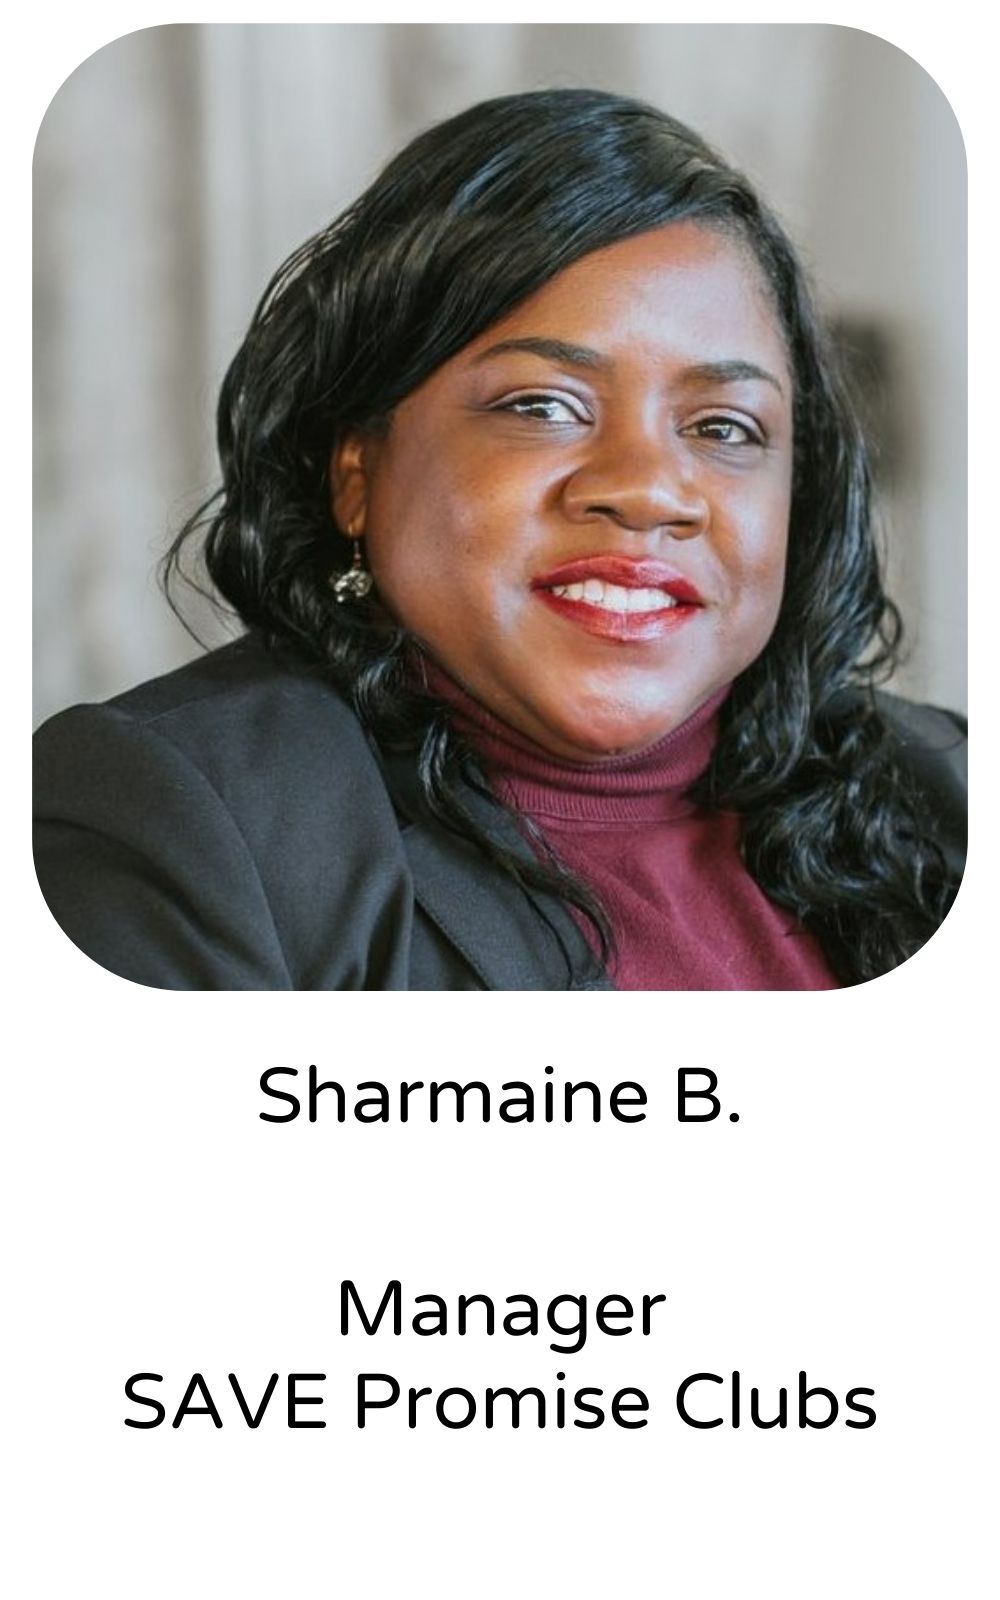 Sharmaine B, Manager, SAVE Promise Clubs